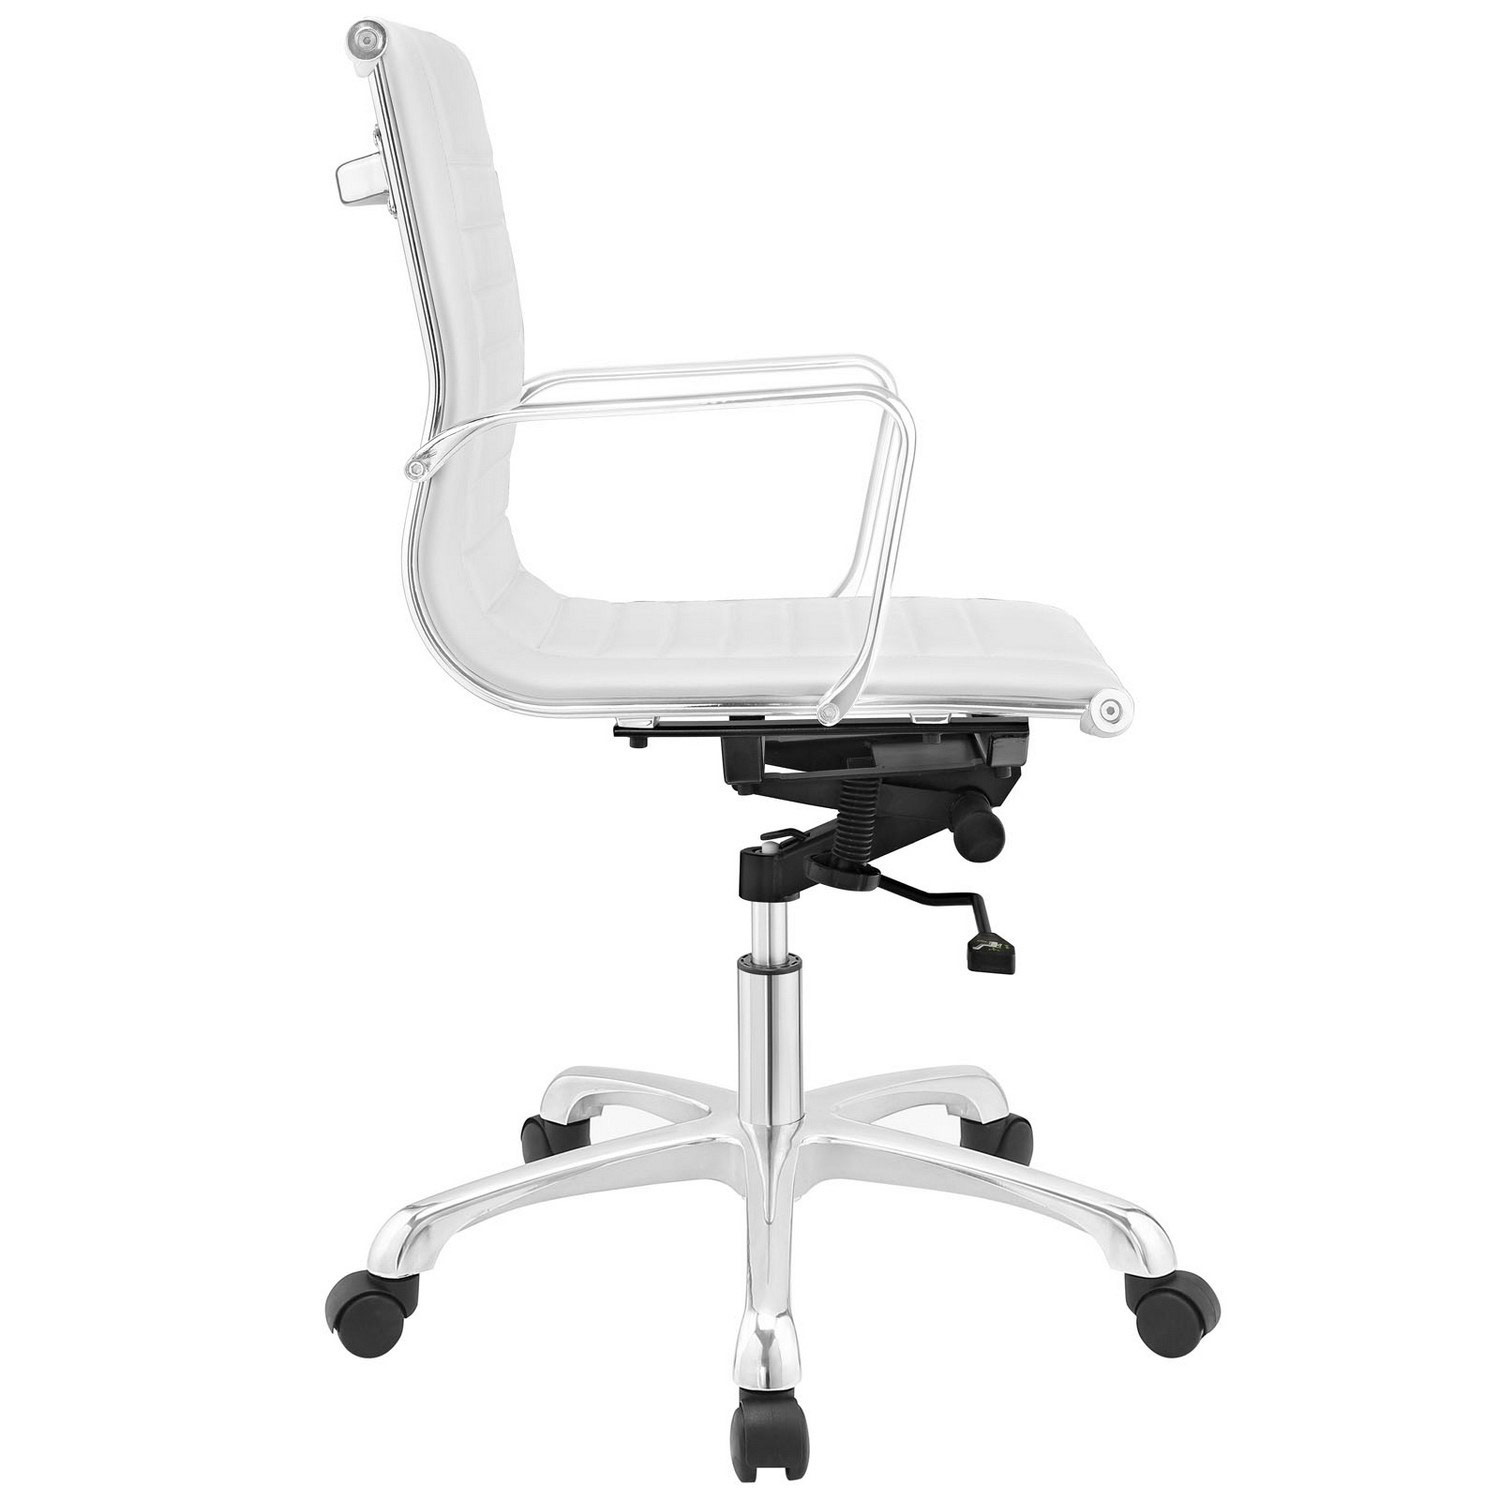 Modway Runway Mid Back Office Chair - White